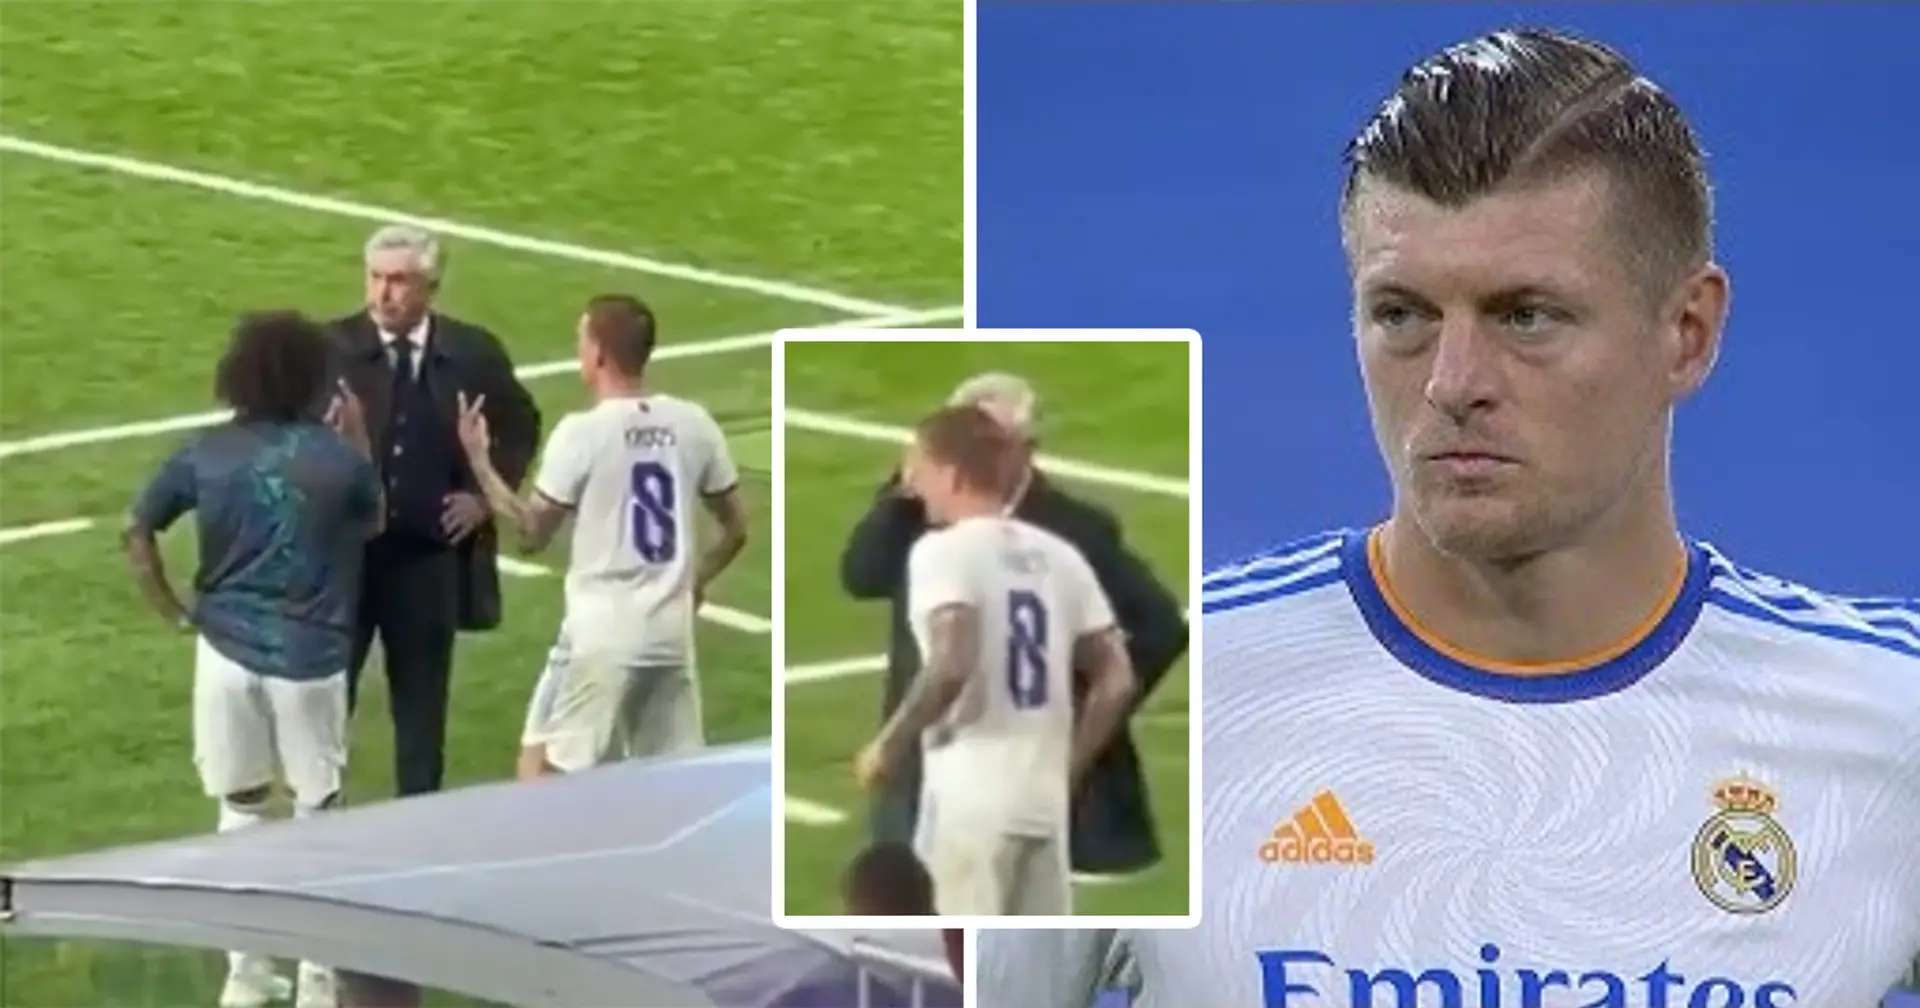 Revealed: Why Carlo Ancelotti spoke to Real Madrid players before making substitutions against Man City